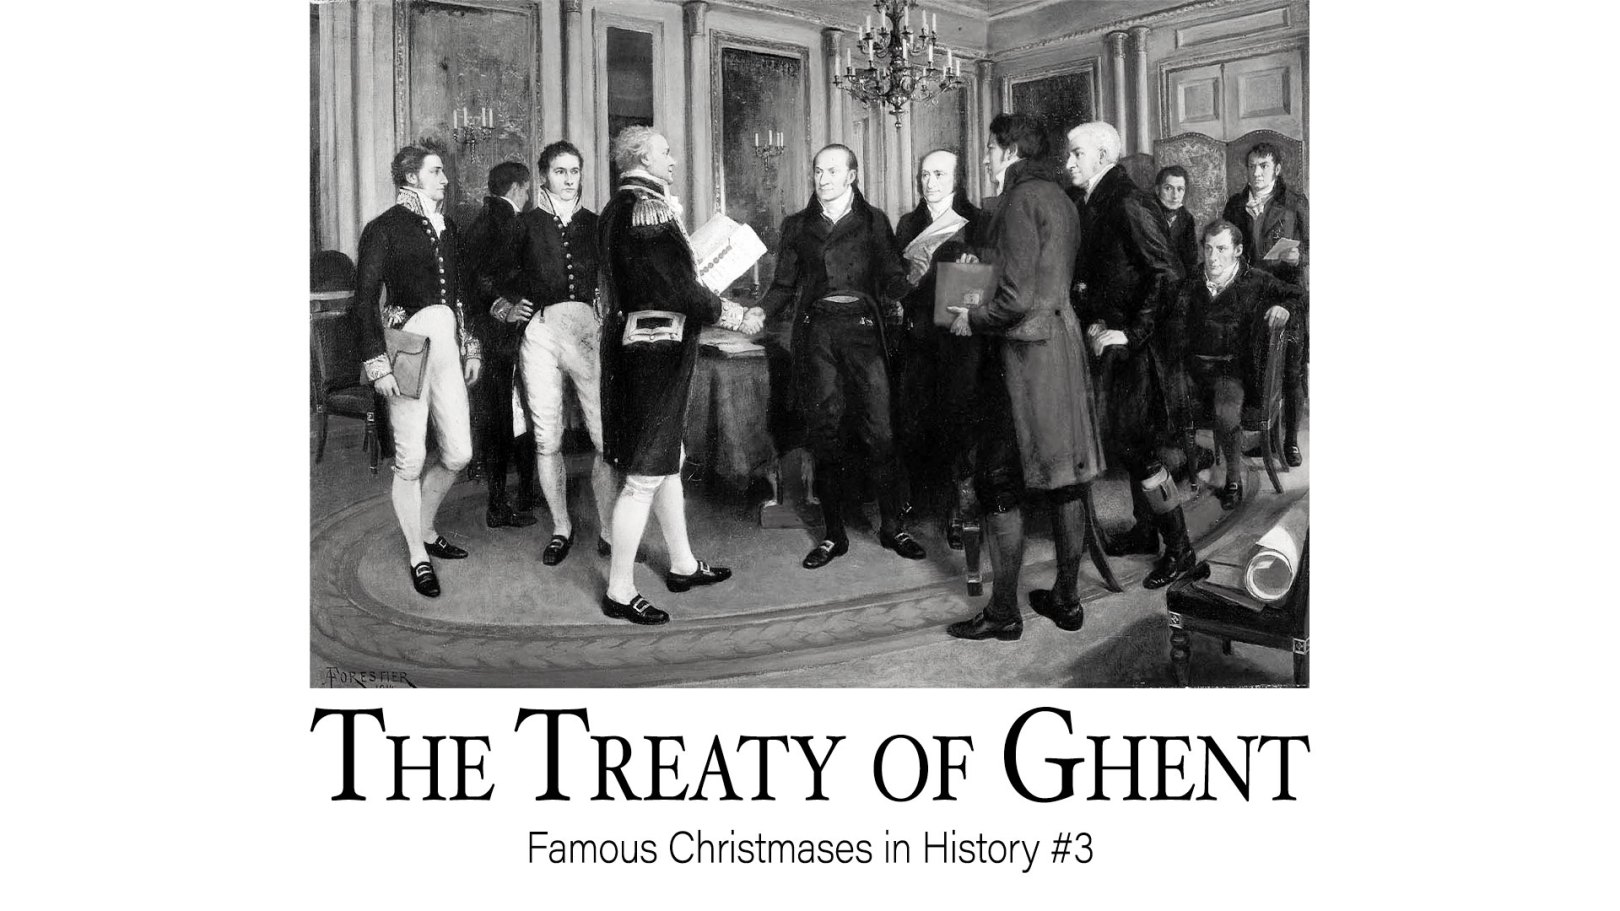 The Treaty of Ghent: Famous Christmases in History #3